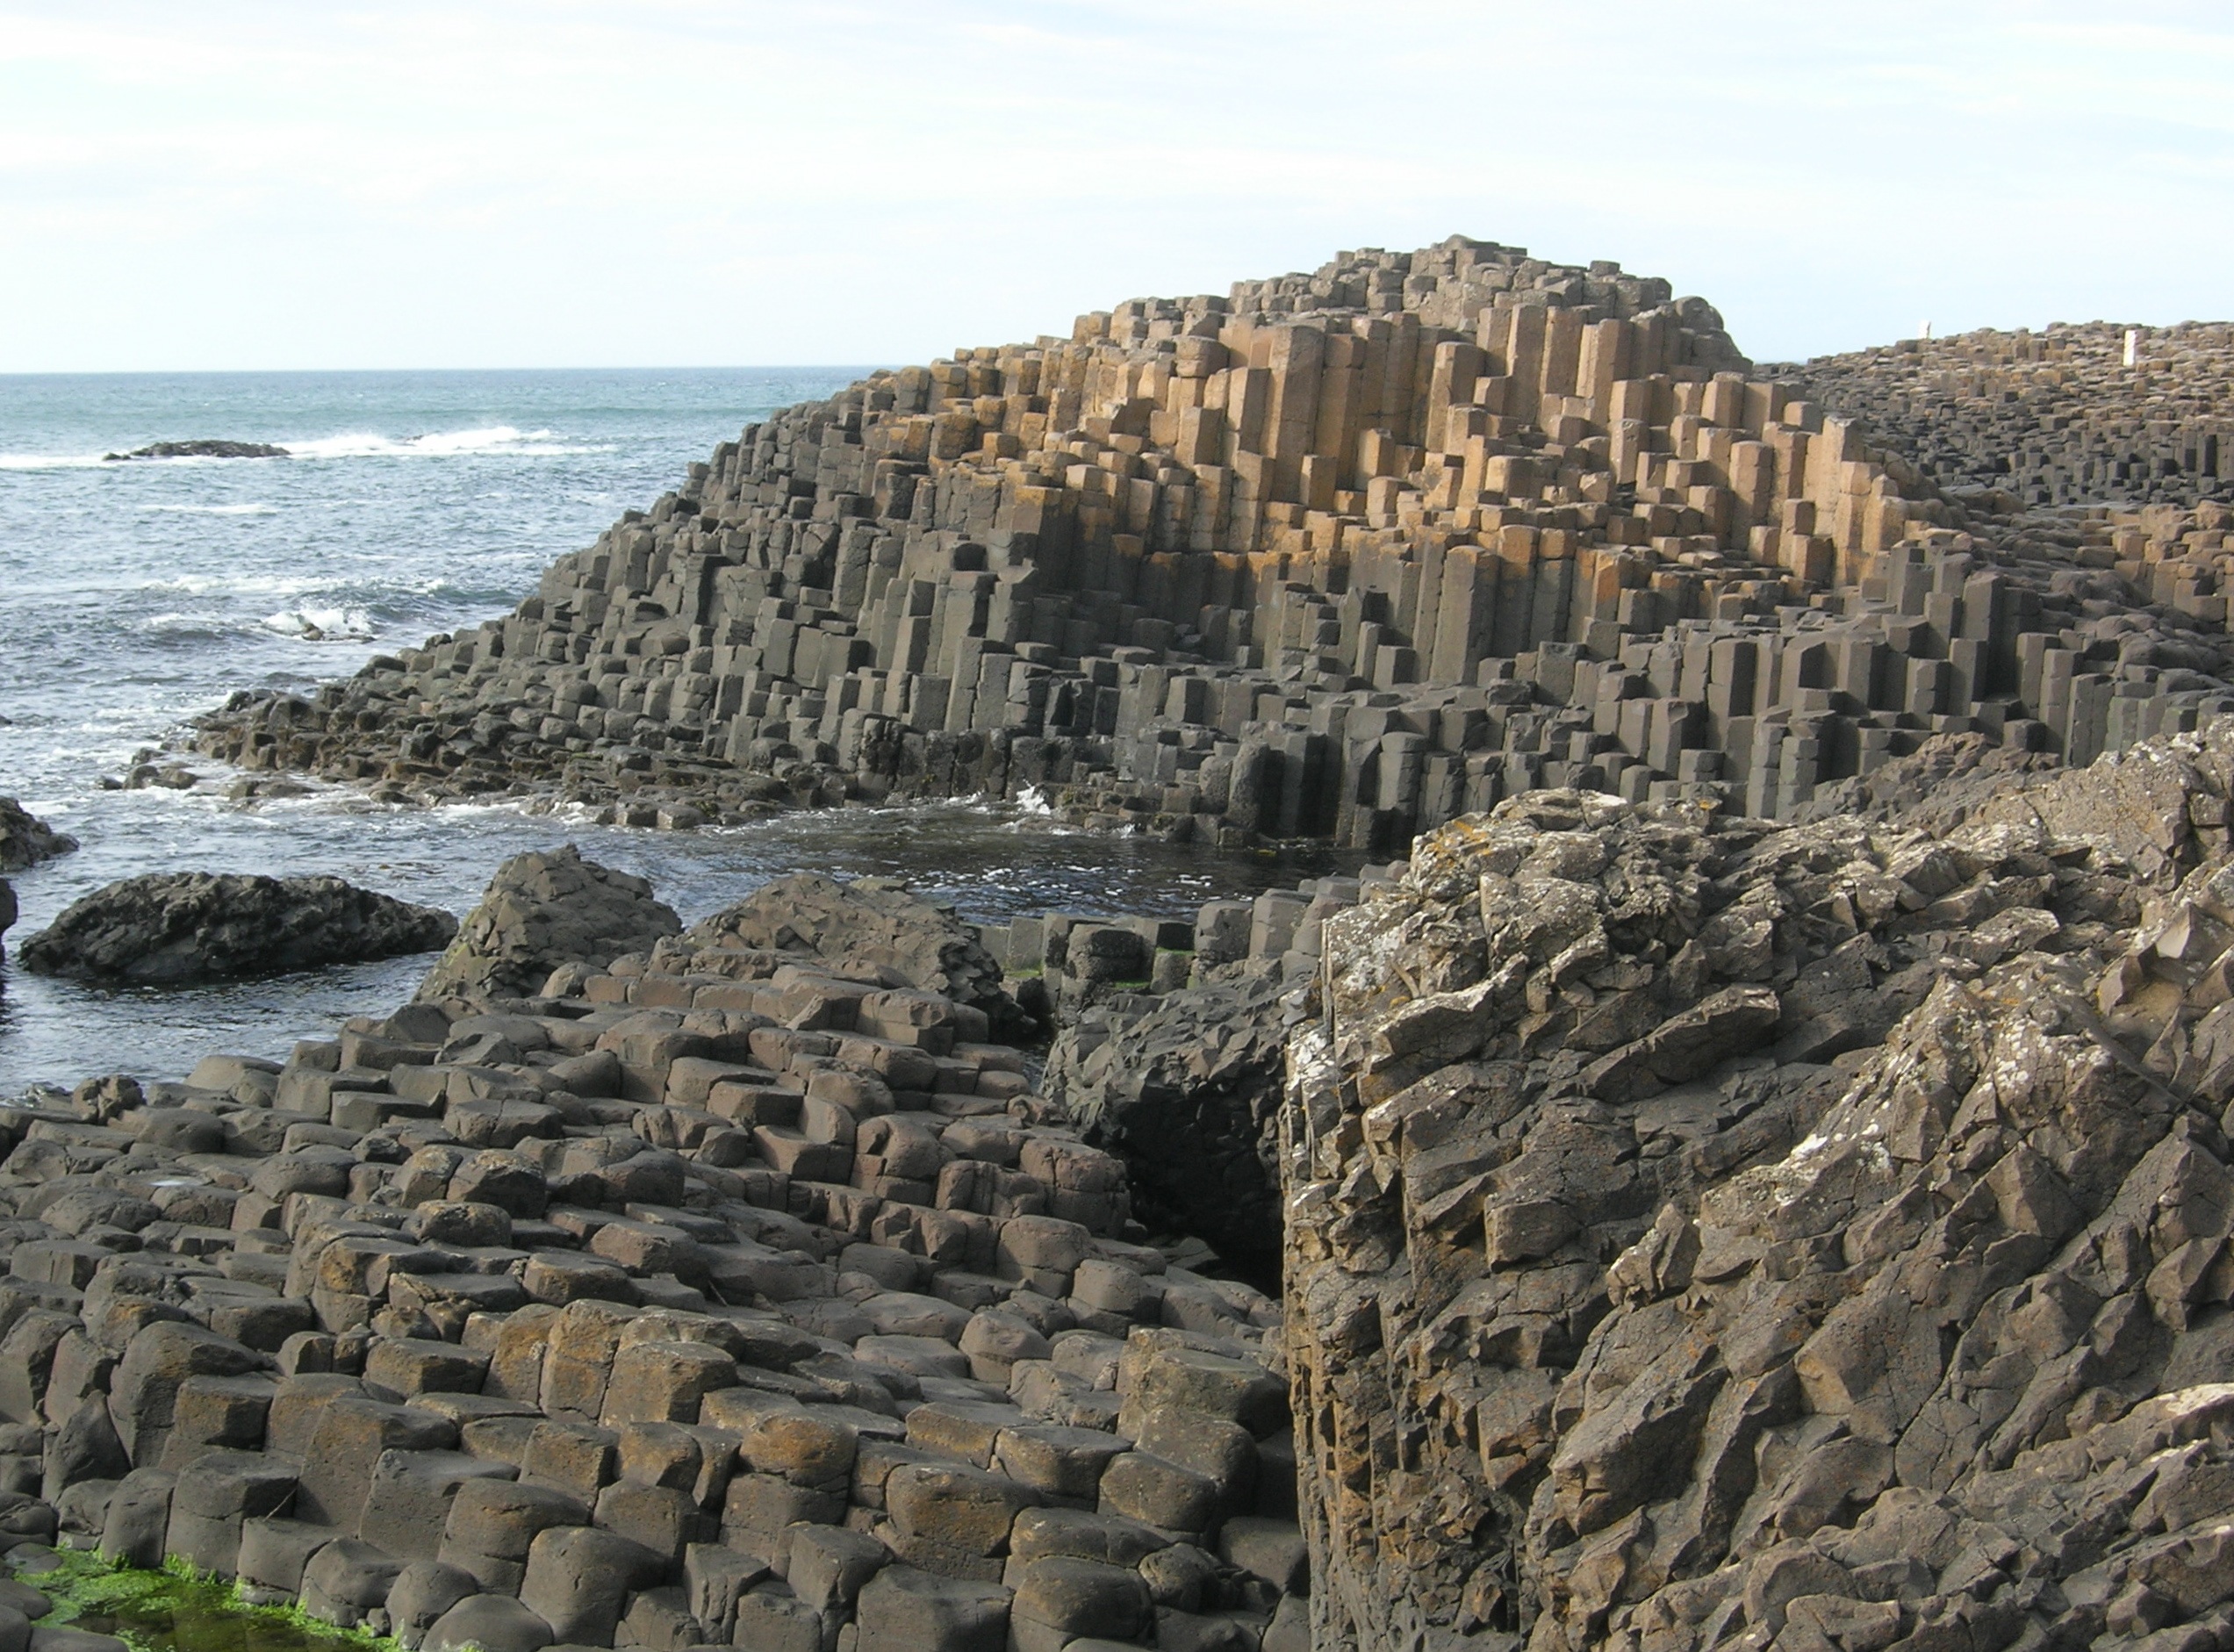 The Giant’s Causeway in Northern Ireland